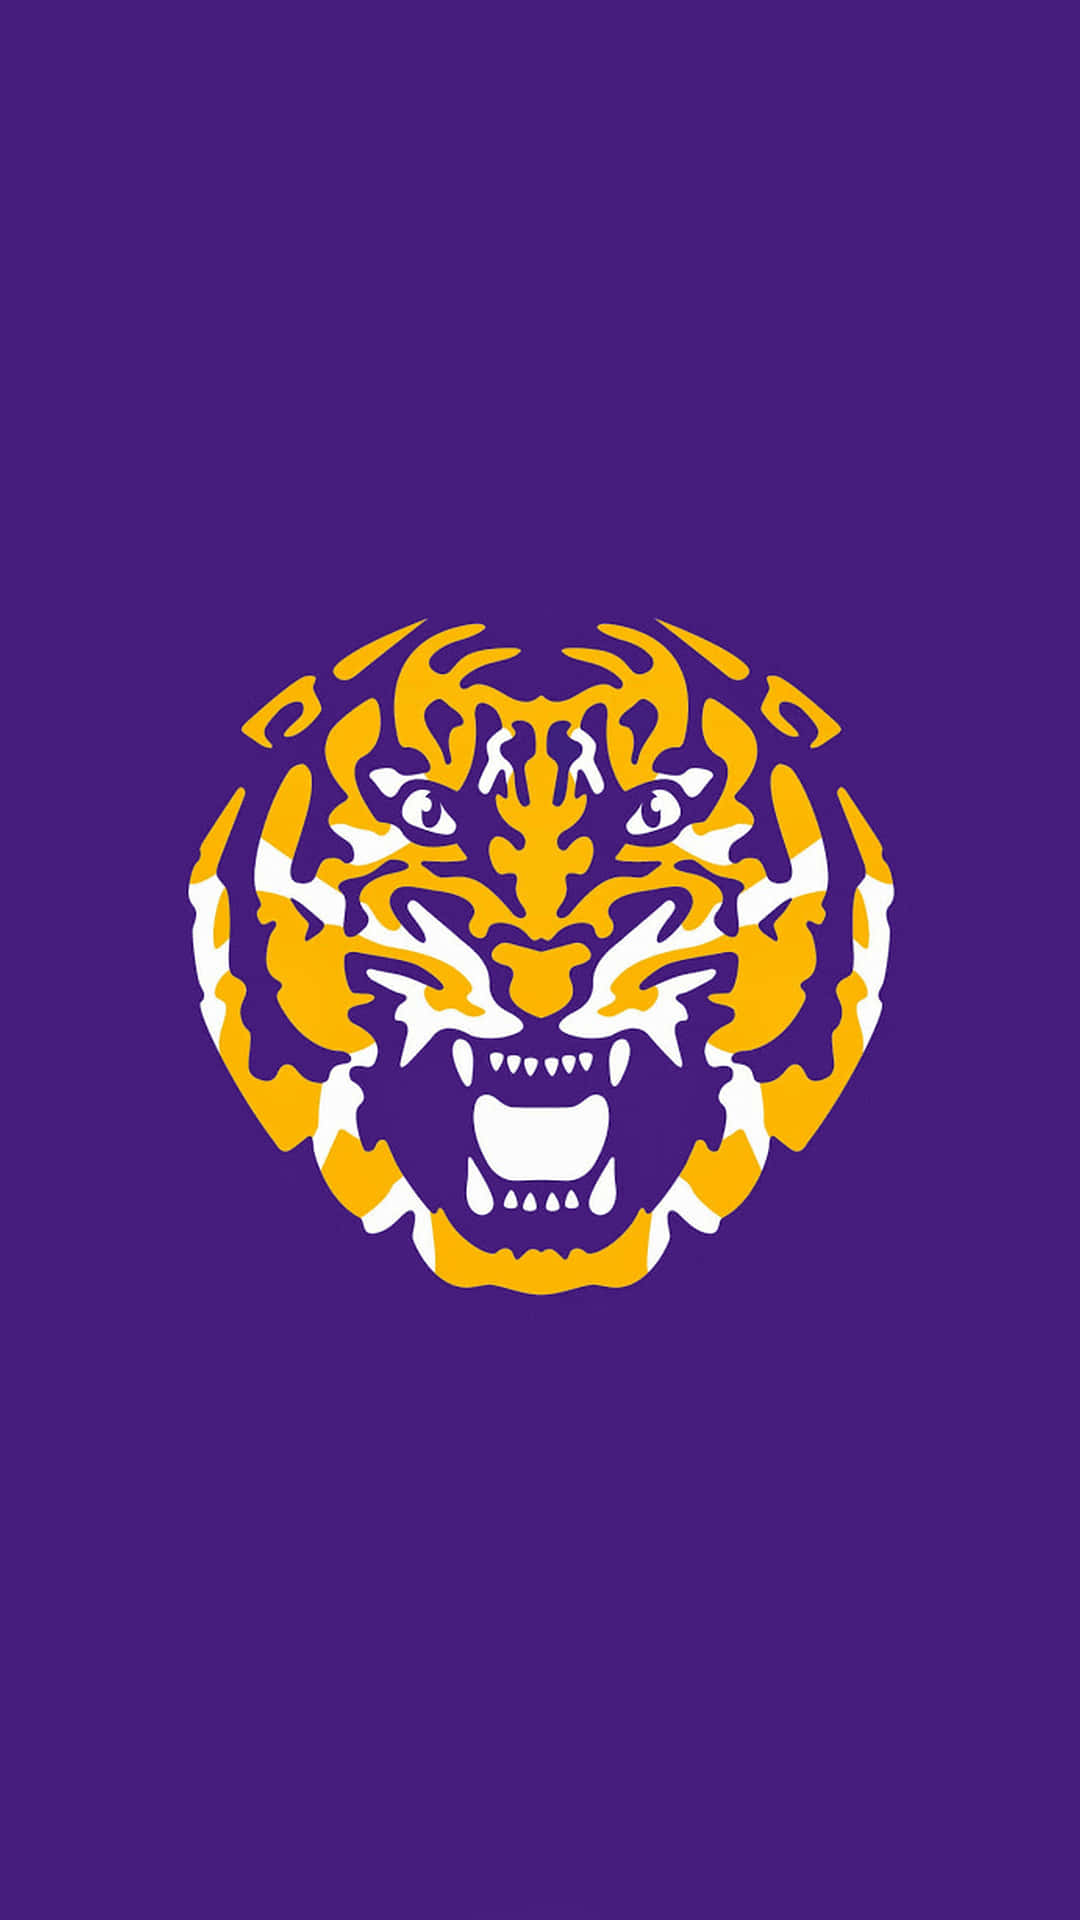 Cheer on your LSU Tigers with Pride Wallpaper